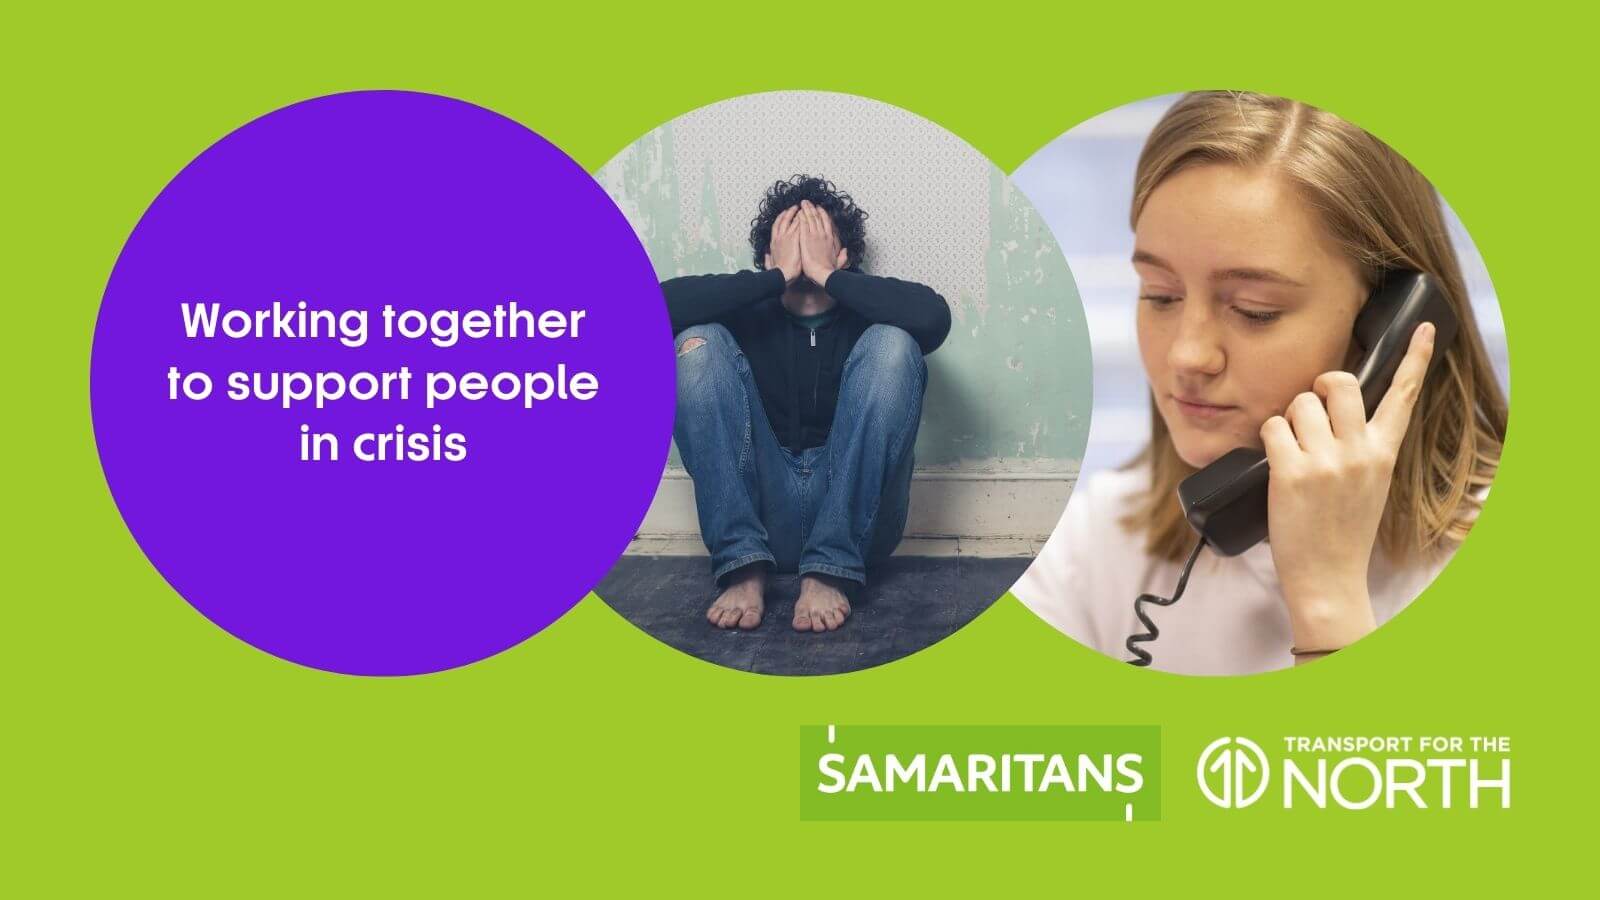 TfN and Samaritans: Working together to support people in crisis 